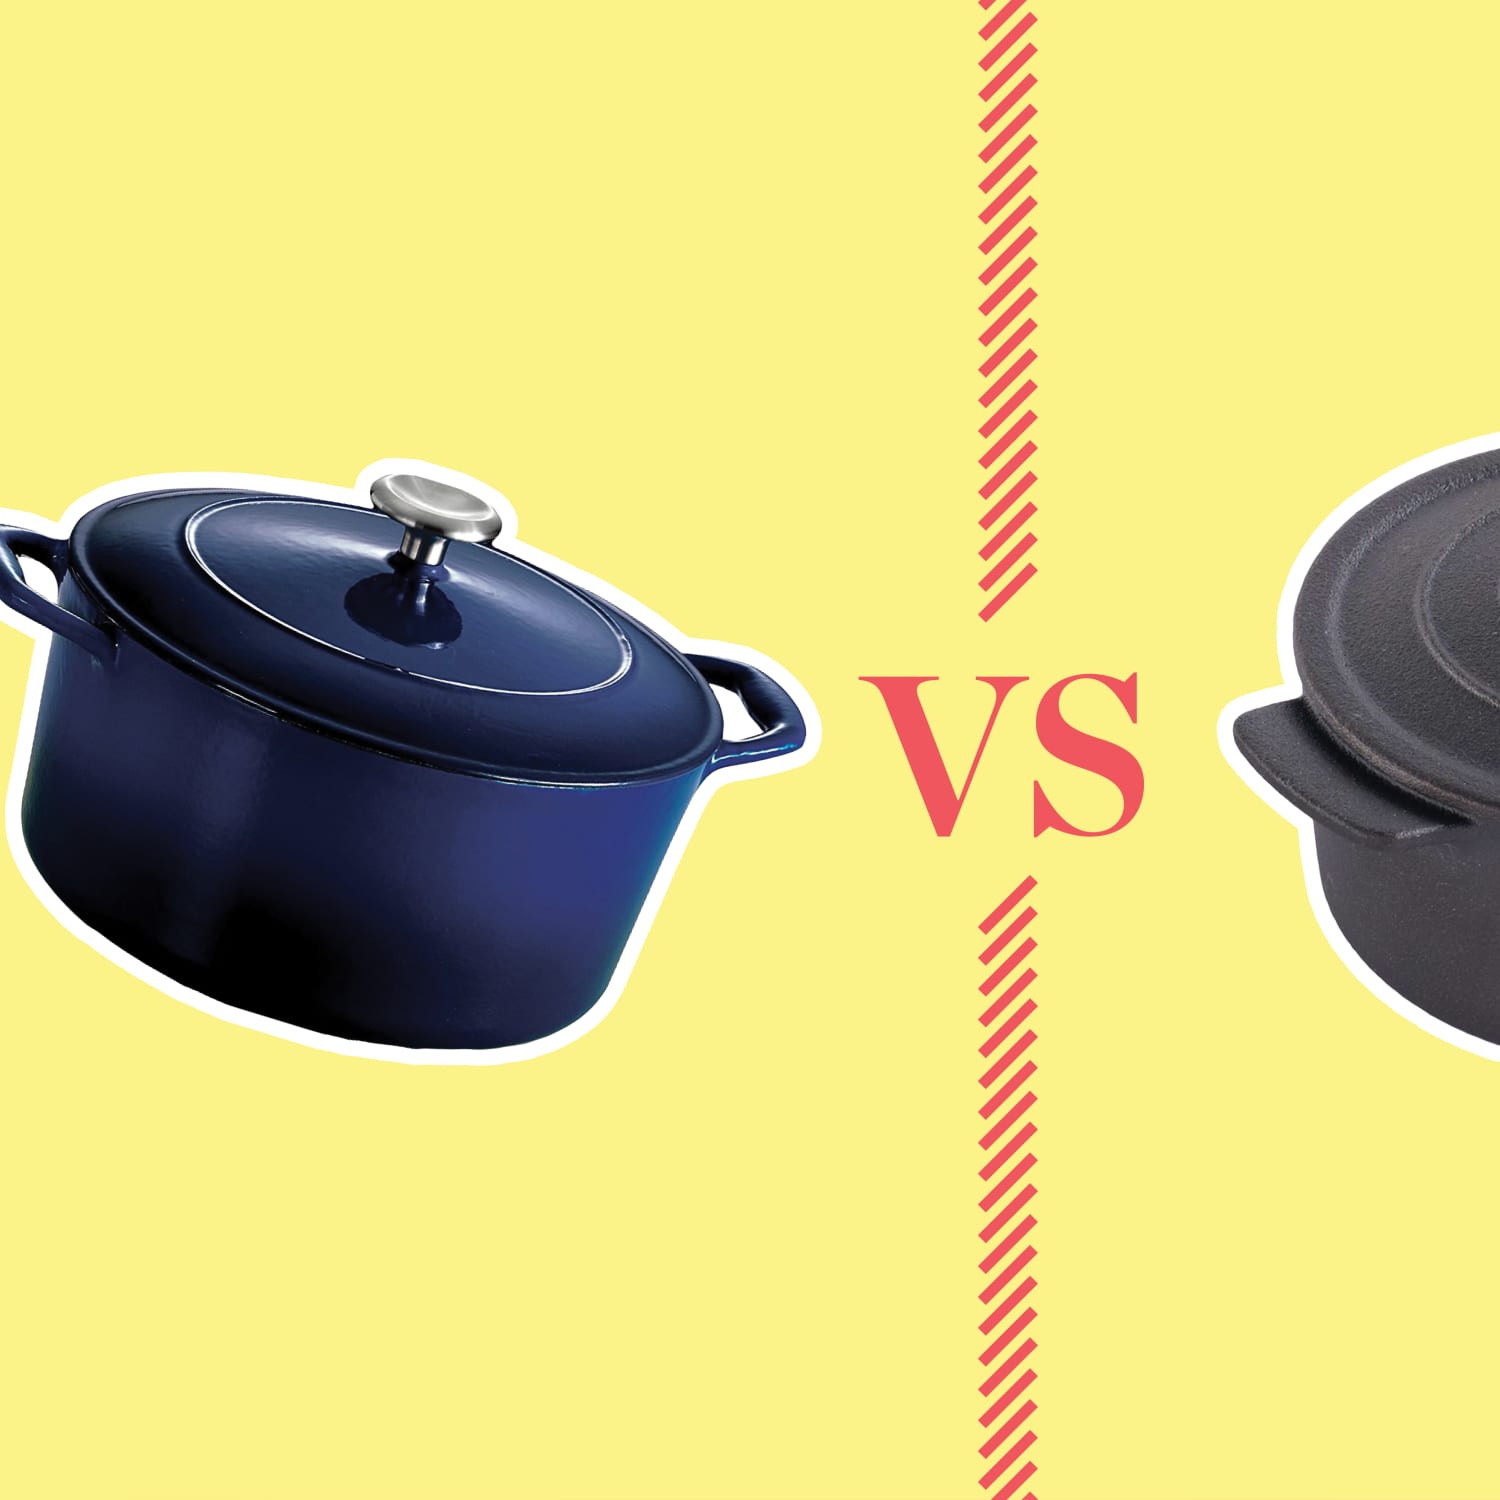 Why You Want an Enameled Cast Iron Dutch Oven in Your Kitchen